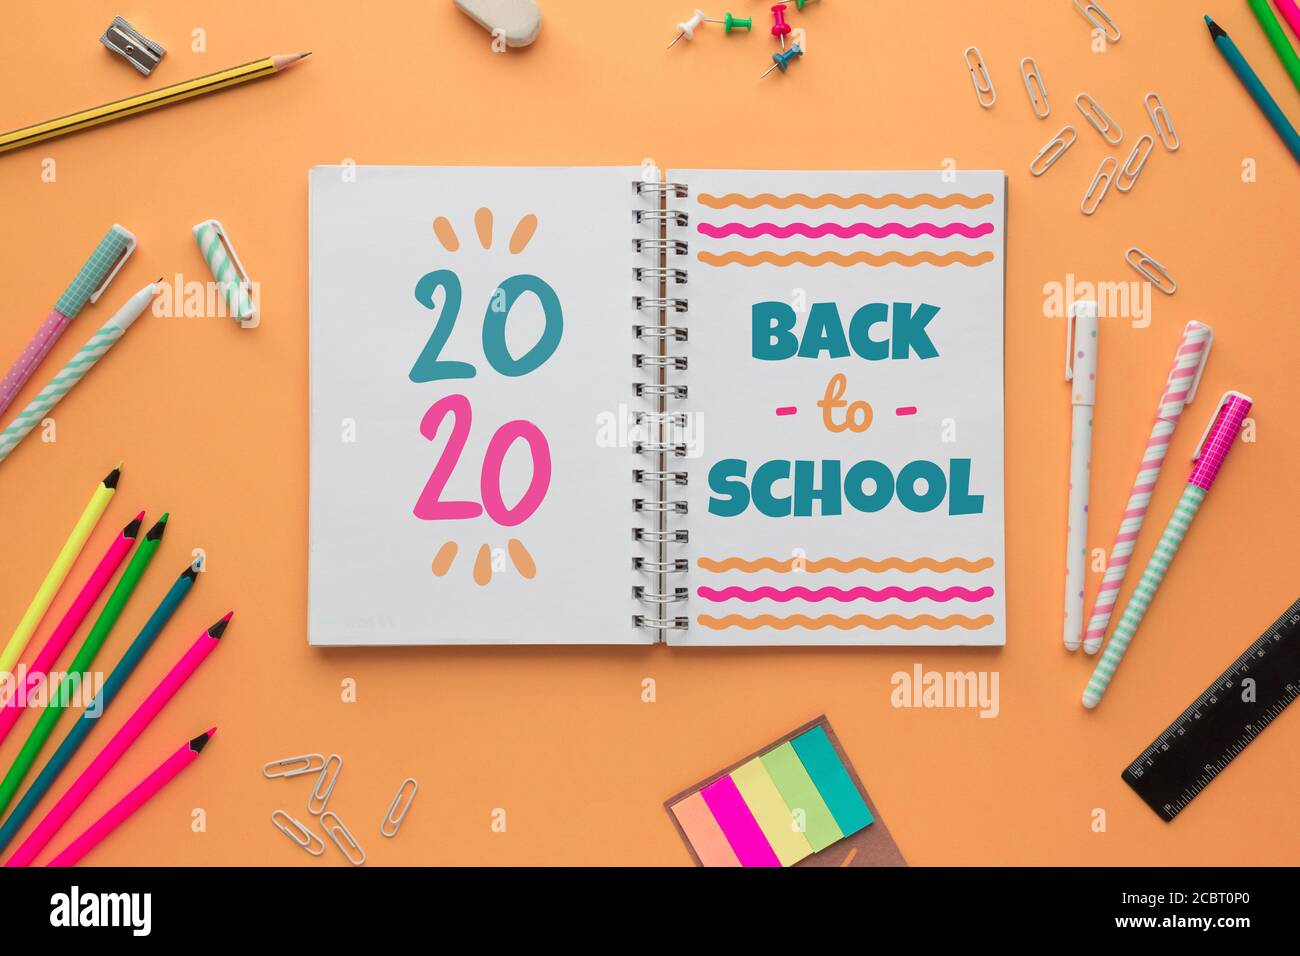 Stock photo of the back to school concept with an open notebook with lettering and some stationery objects on a salmon background Stock Photo